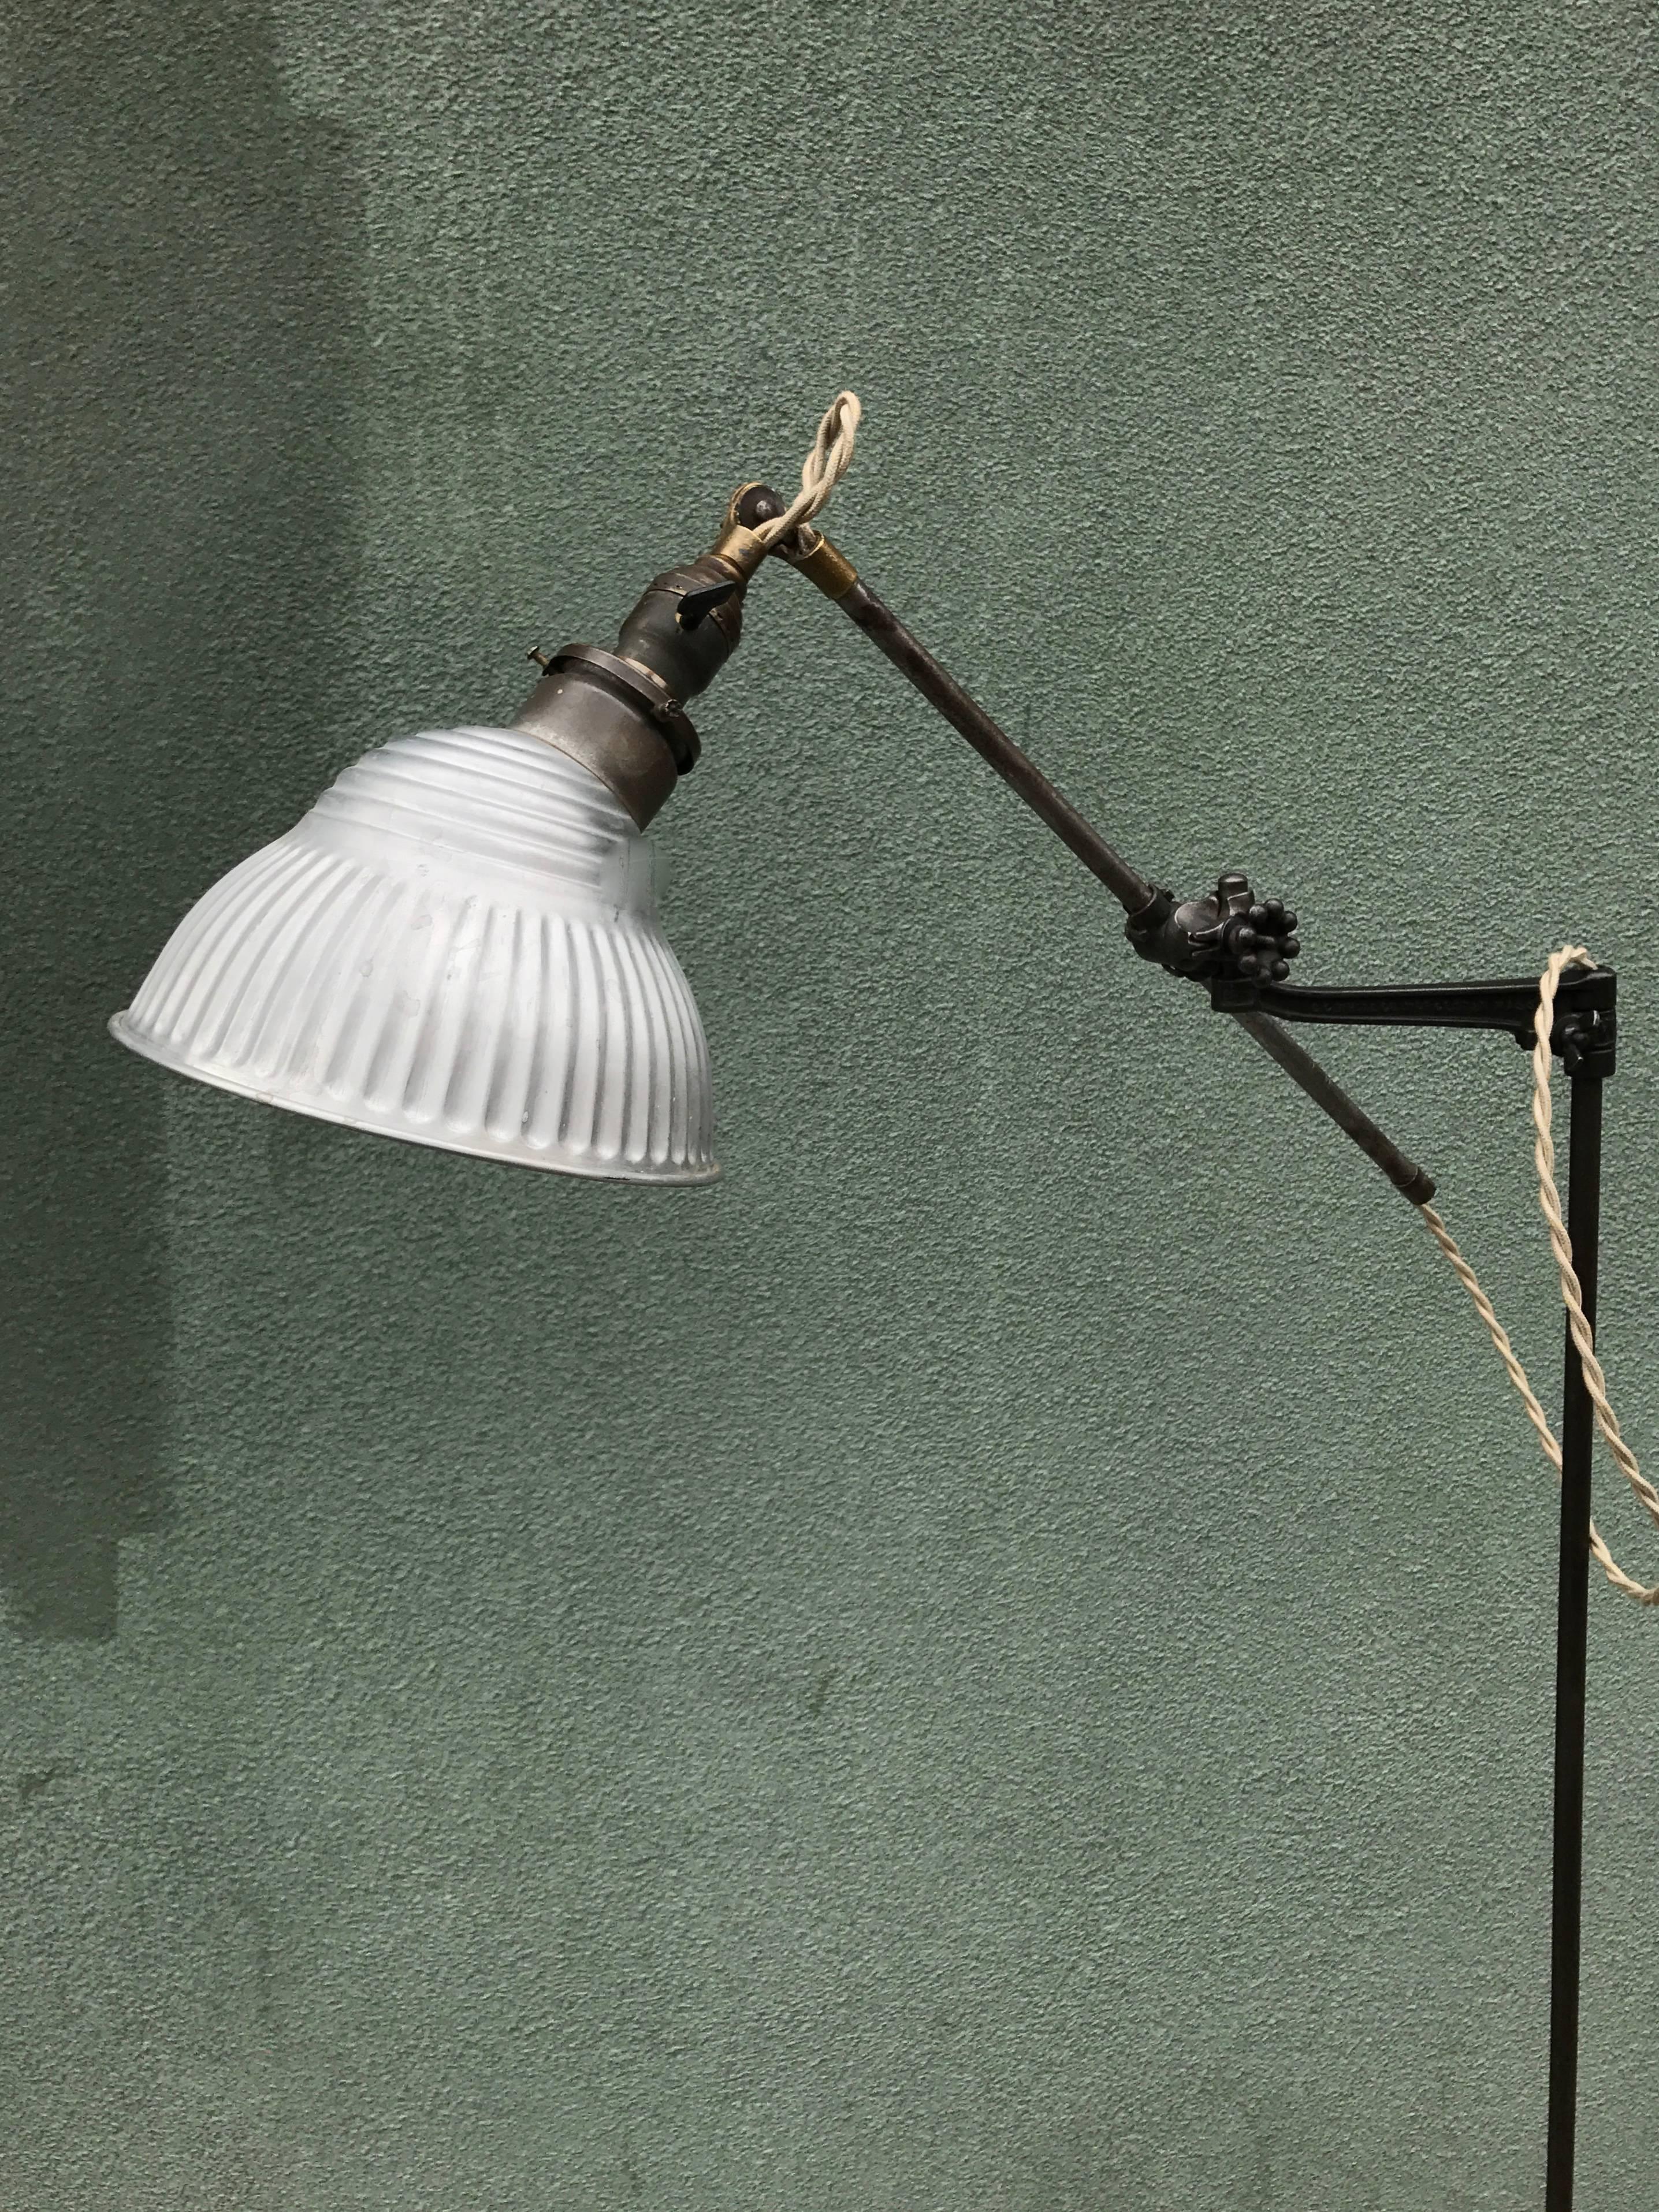 O. C. White floor lamp, all original components (rewired), wide range of movements via the patented swing arm, the creator Otis C White was a dental surgeon in the late 19th century who created many patented designs in lighting and in 1893 his